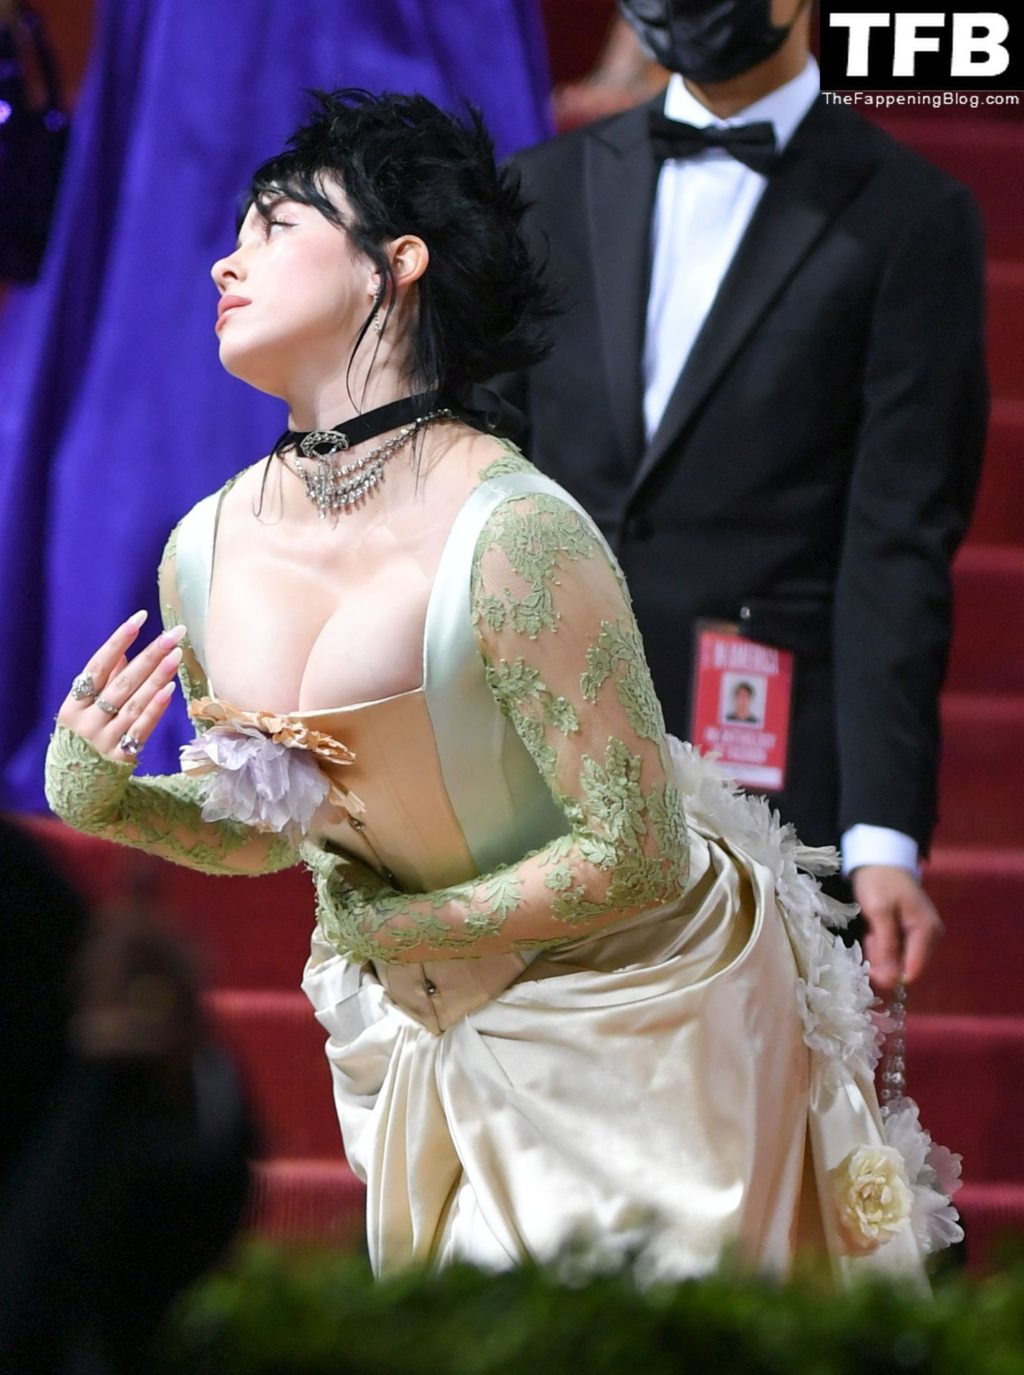 Billie Eilish Sexy The Fappening Blog 150 1024x1375 - Billie Eilish Showcases Nice Cleavage at The 2022 Met Gala in NYC (155 Photos)